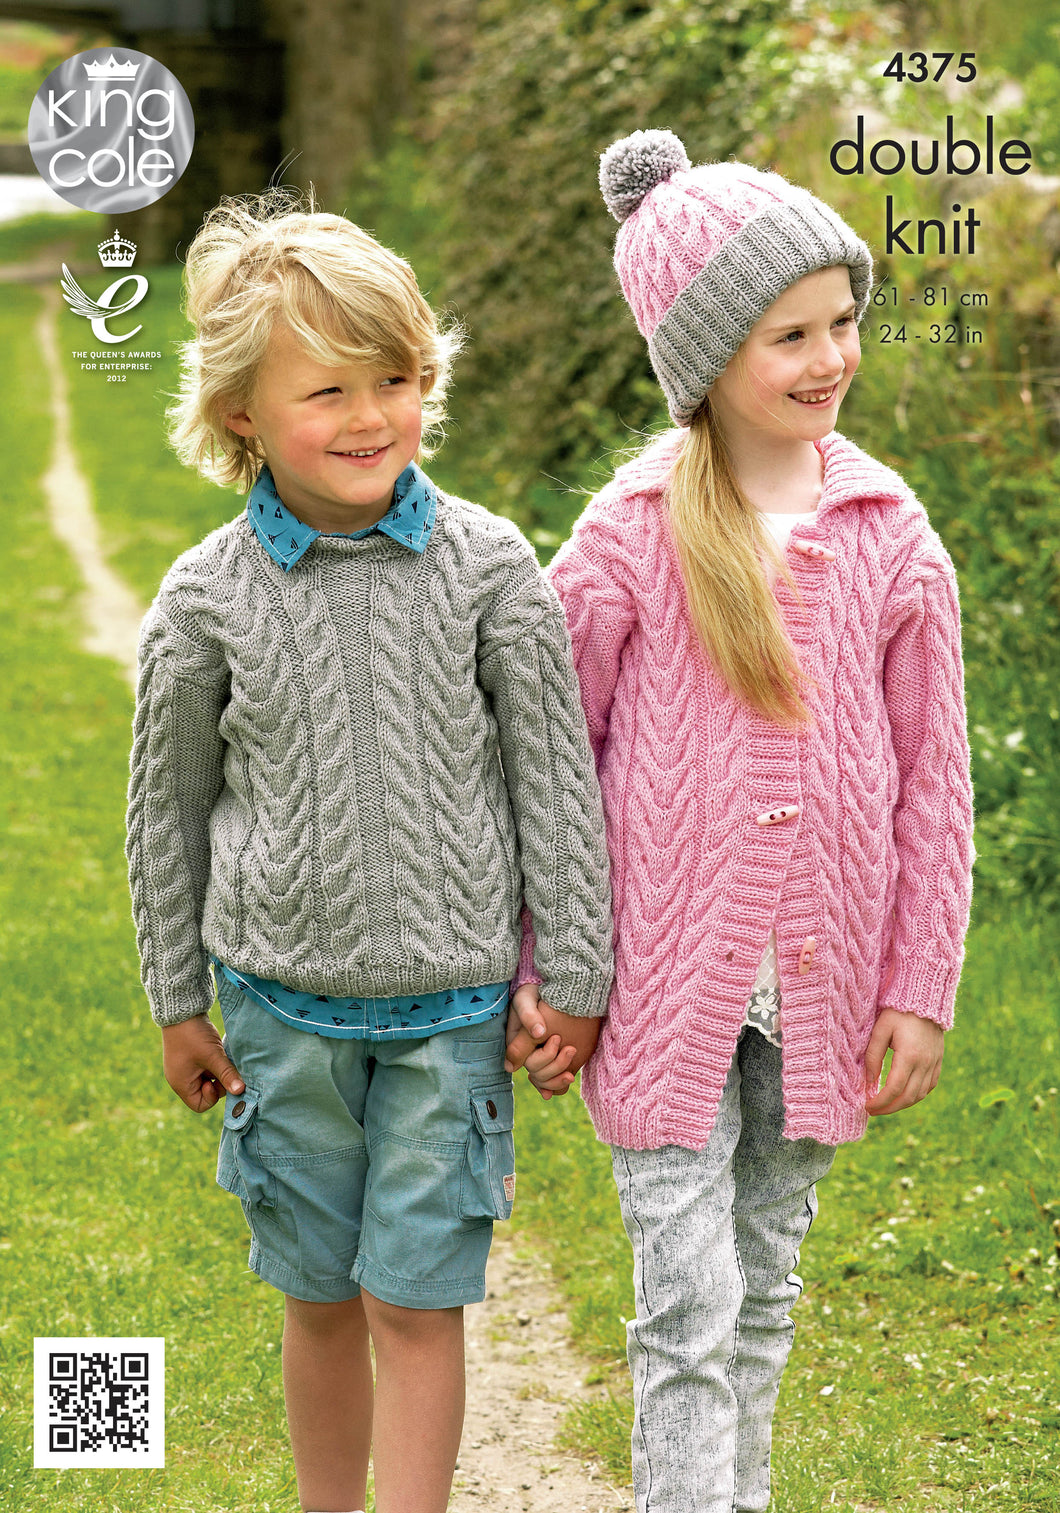 King Cole Pattern 4375: Sweater, Cardigan and Hat